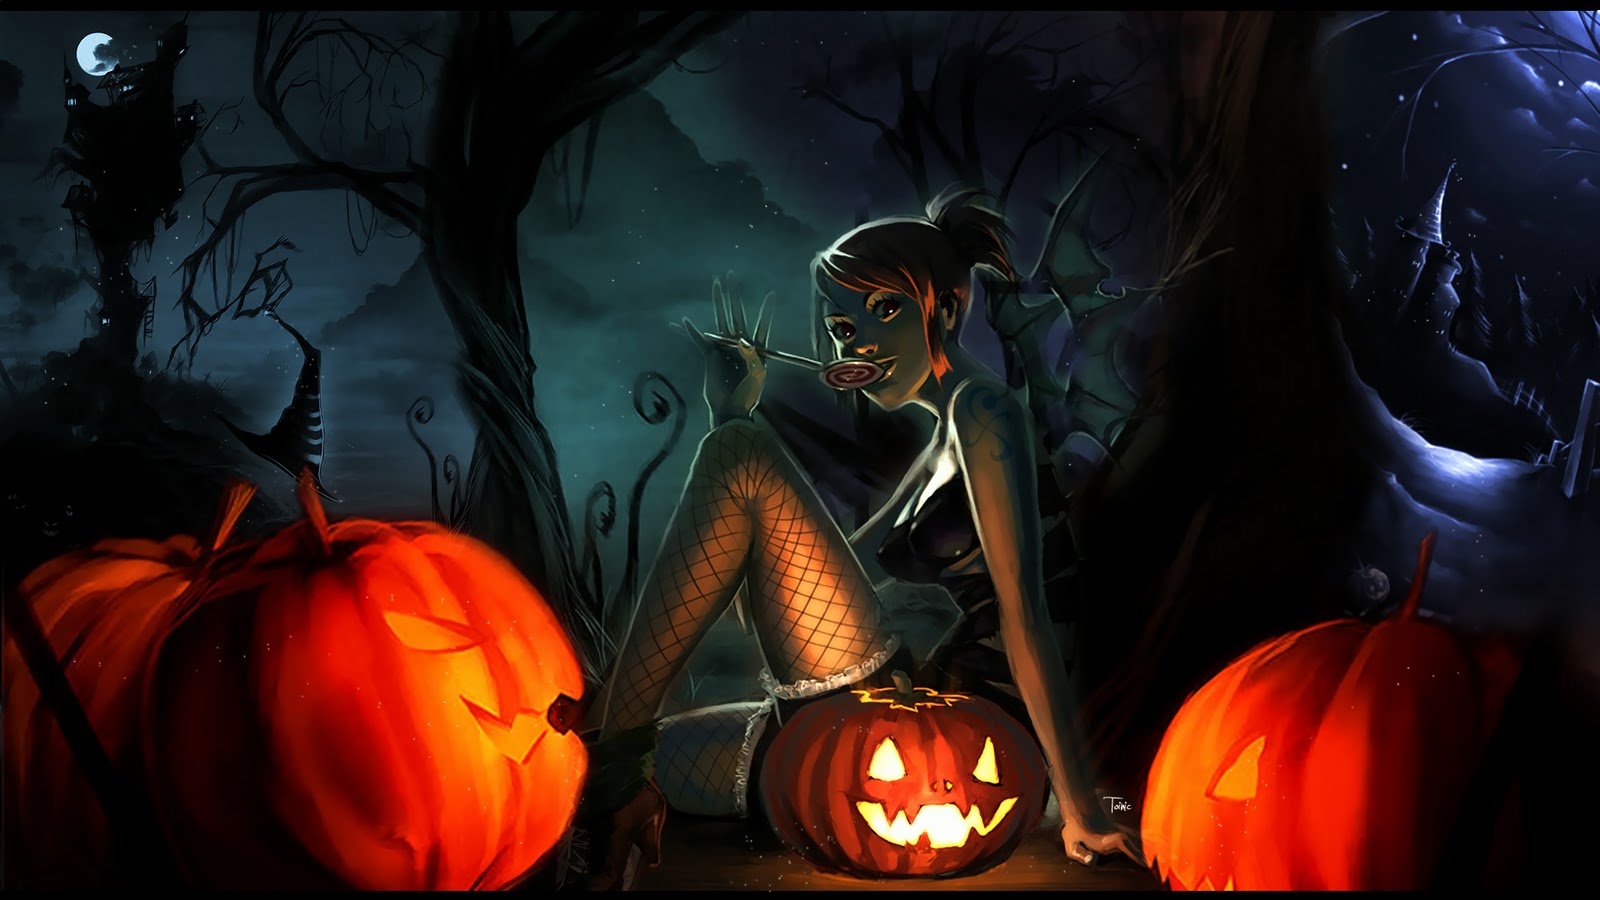 holiday, halloween, creepy, dark, forest, pumpkin, spooky wallpapers for tablet